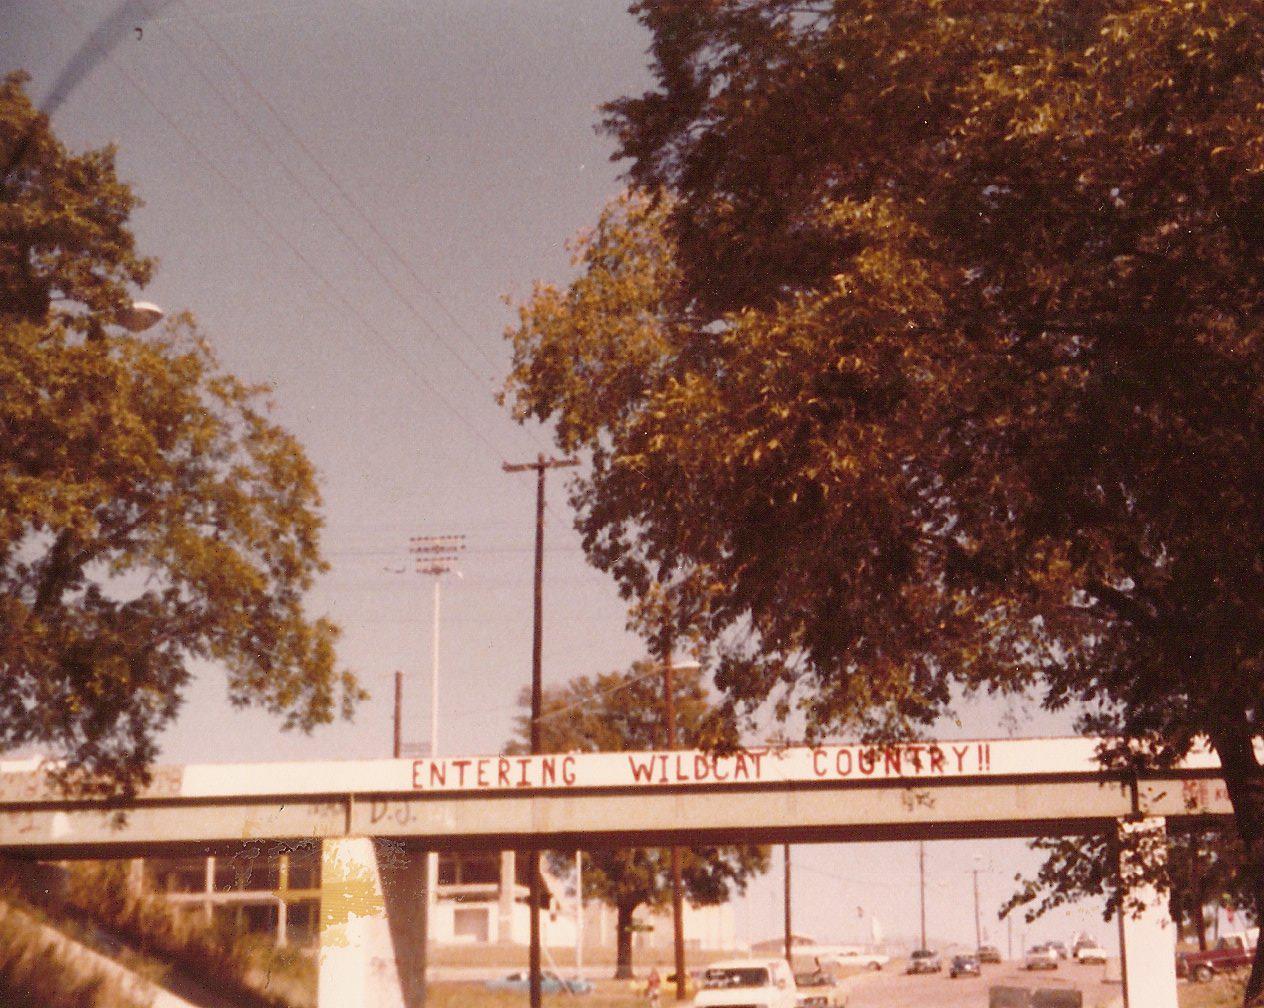 painting the railroad trestle over White Rock Trail became a senior class tradition at Lake Highlands High School in the 1960s after the city widened and paved Church Street. Each senior class was allowed to paint its own message, pictured here in 1986. The tradition ended in the early 2000s at the request of the city. (Photo courtesy of Gayle Schultz).